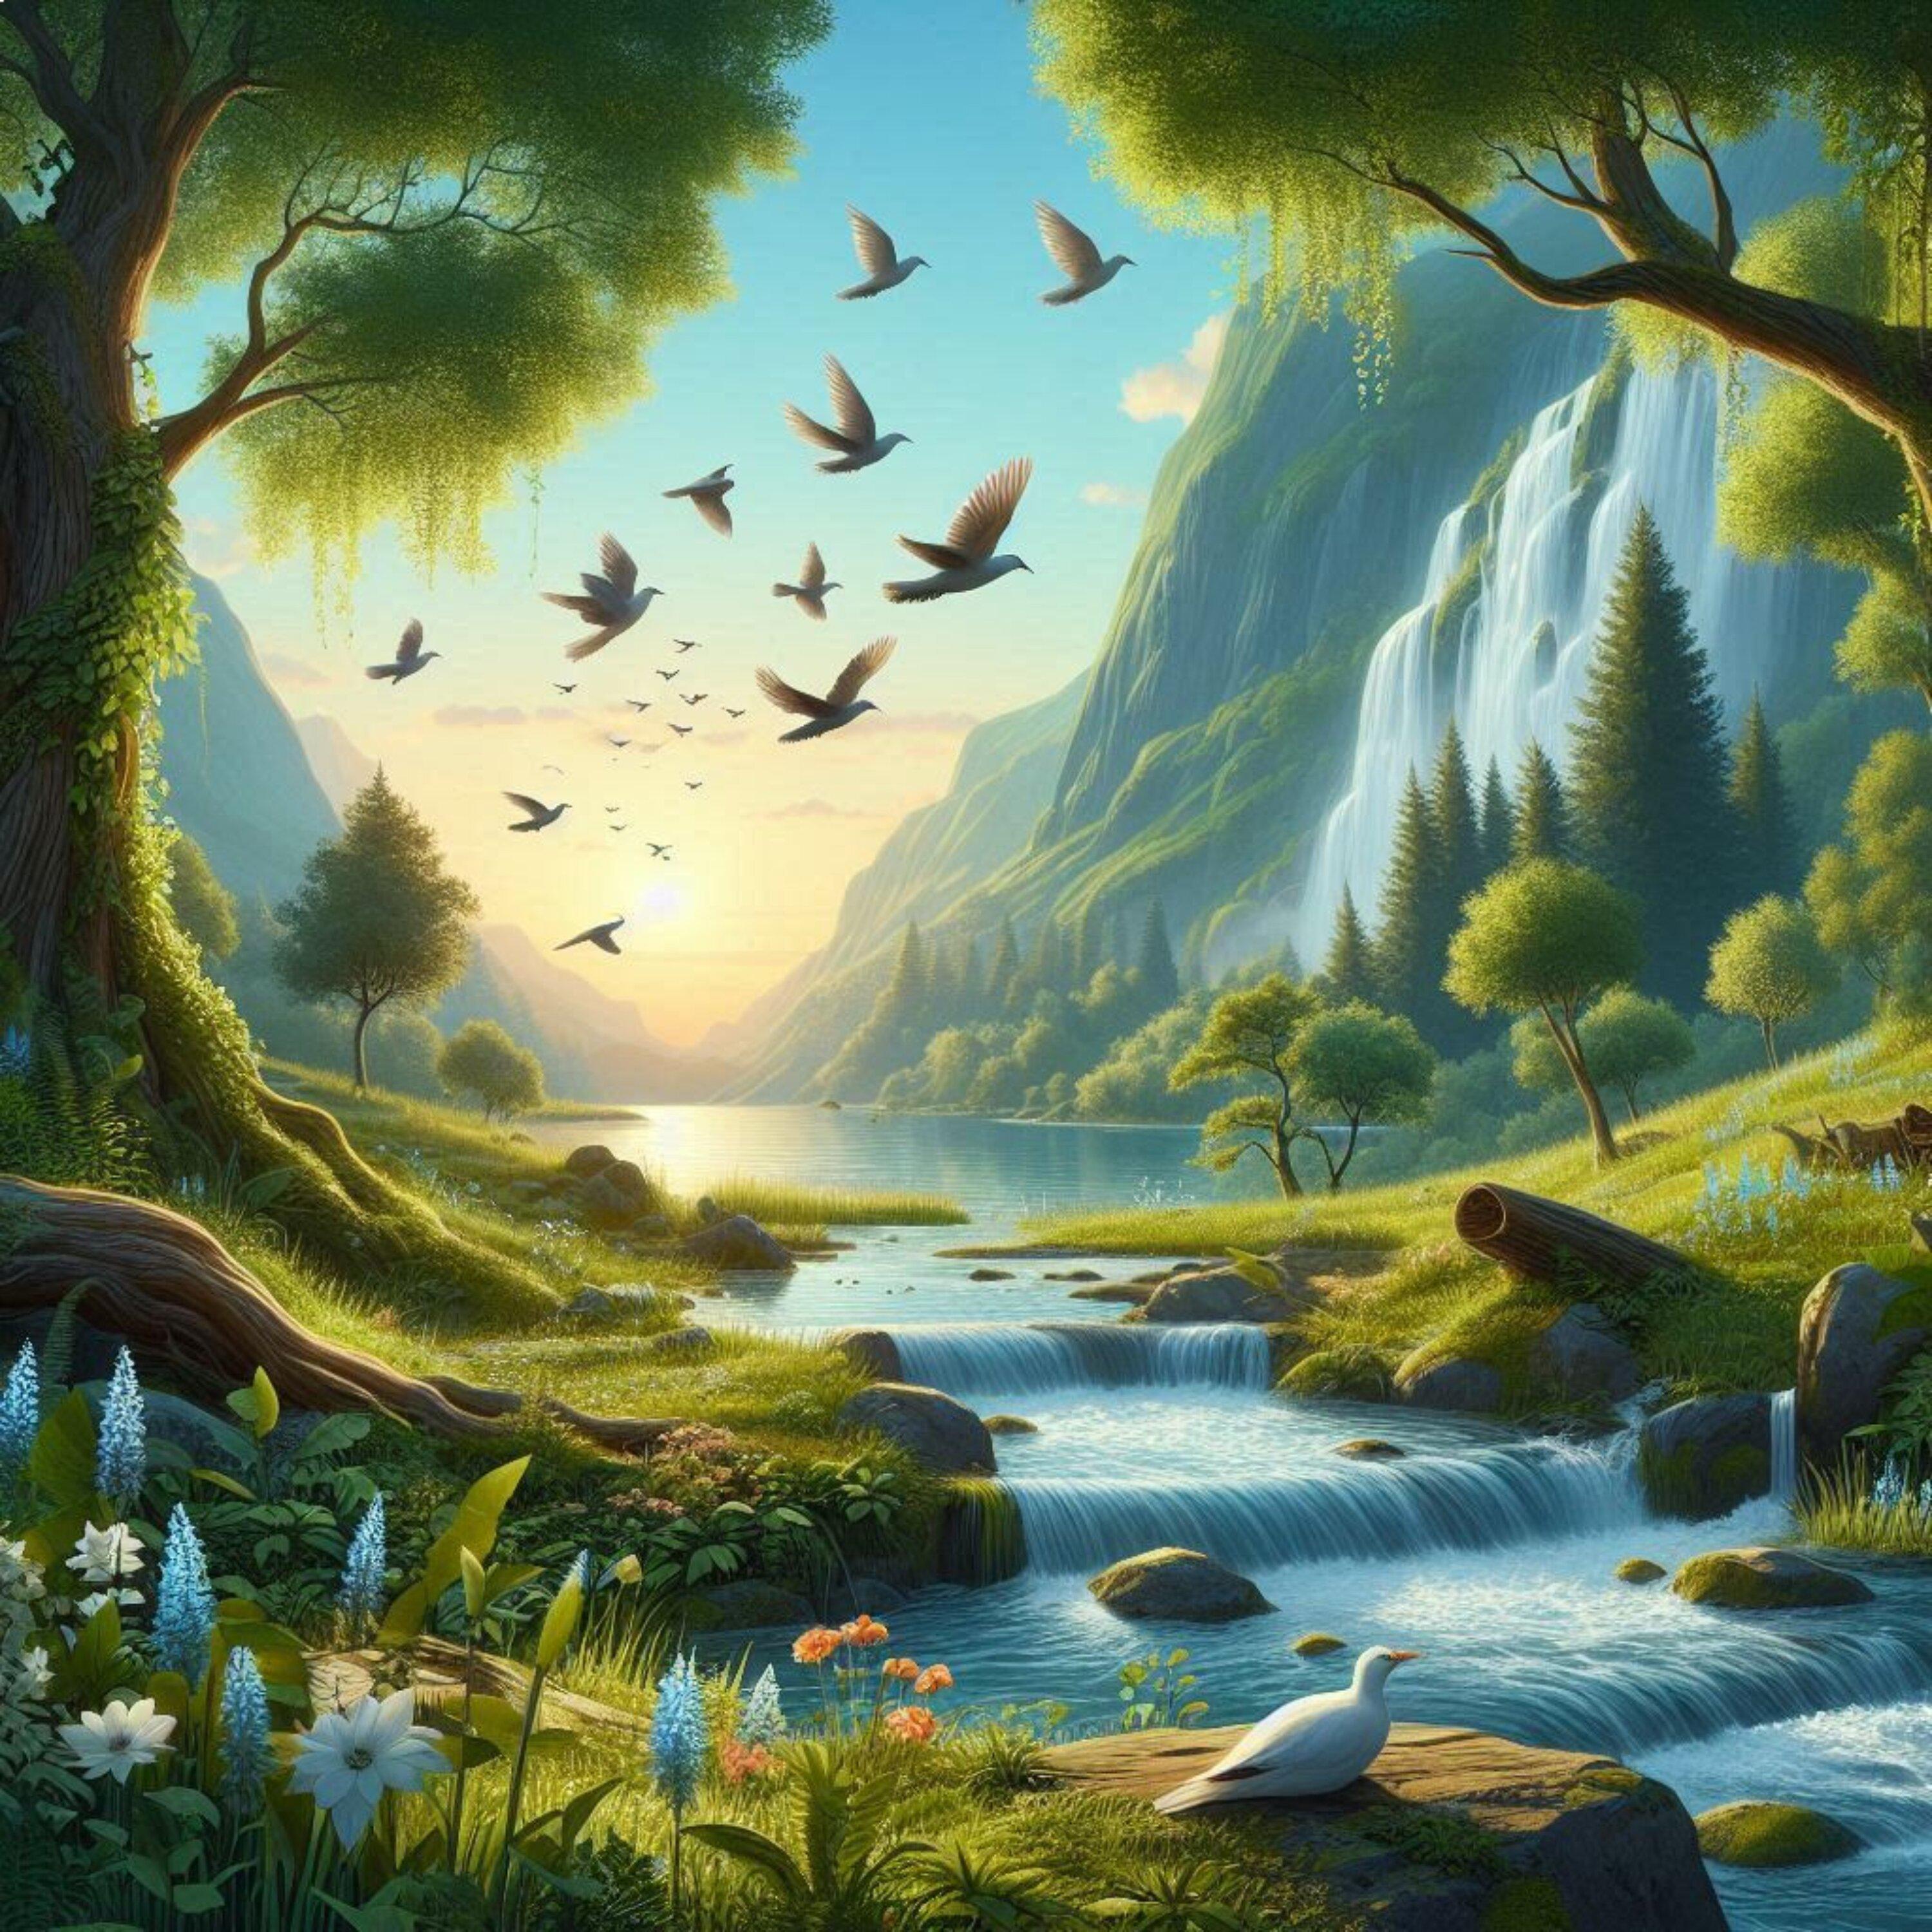 Zarek Atlas - Relaxing Landscape with Birds and Flowing Water in the Background 4